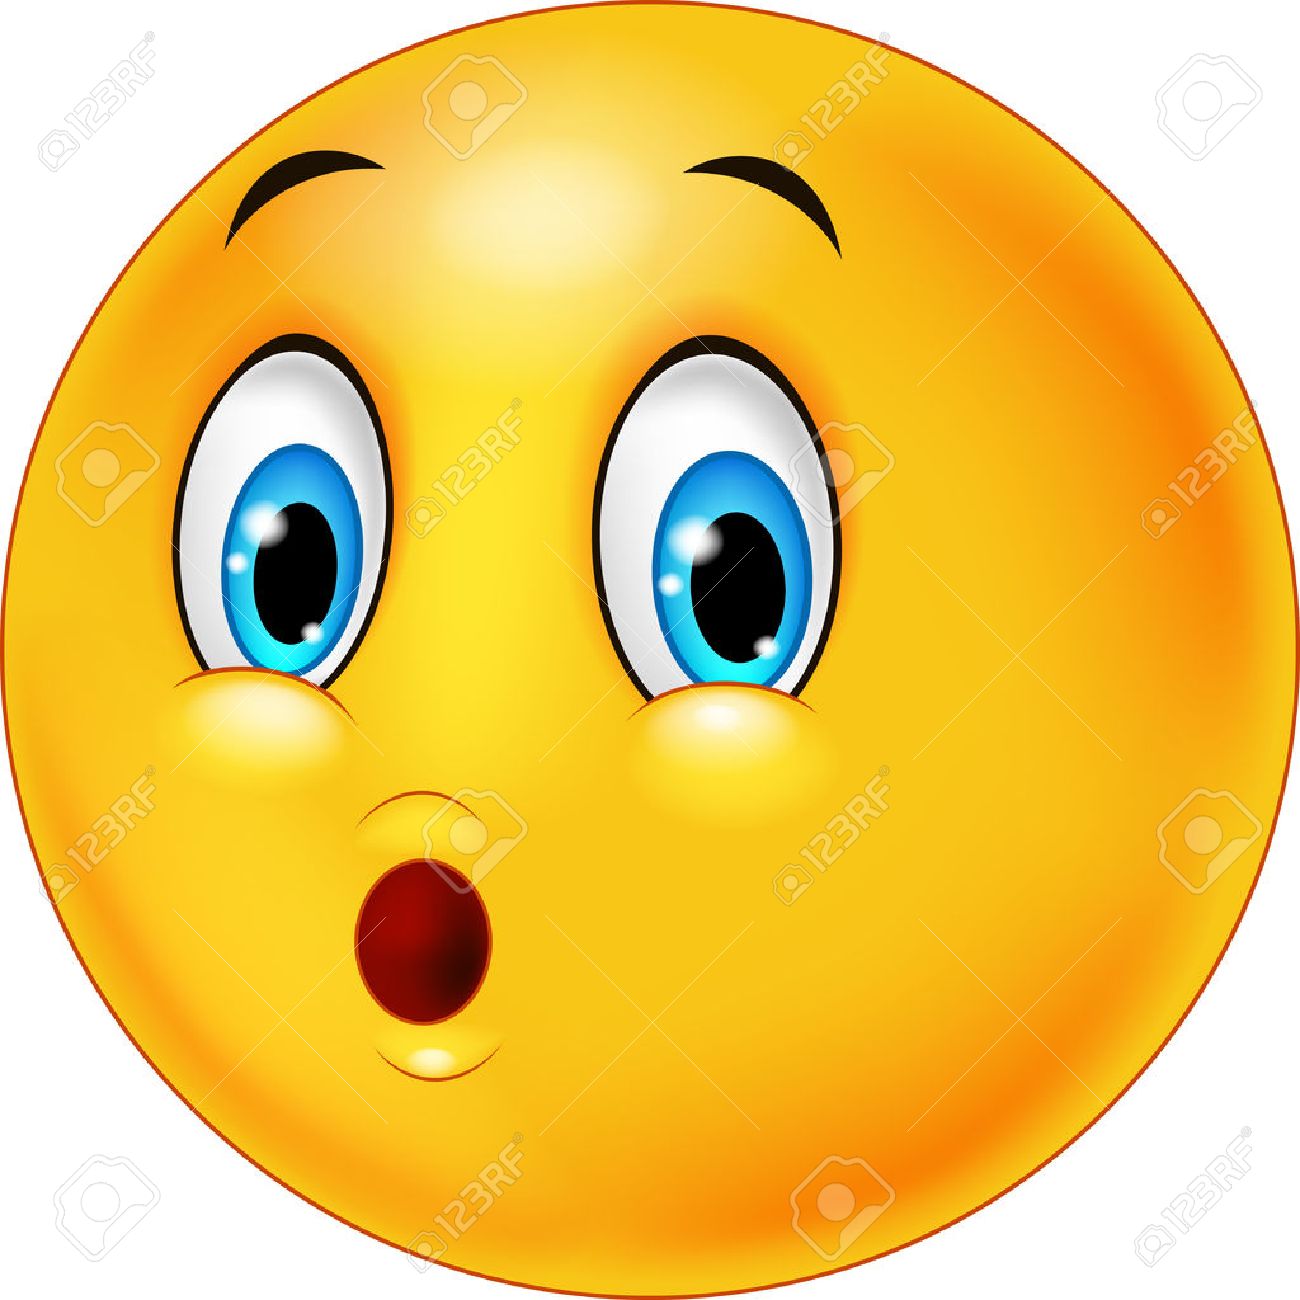 Surprised Emoticon Face Cartoon On White Background Royalty